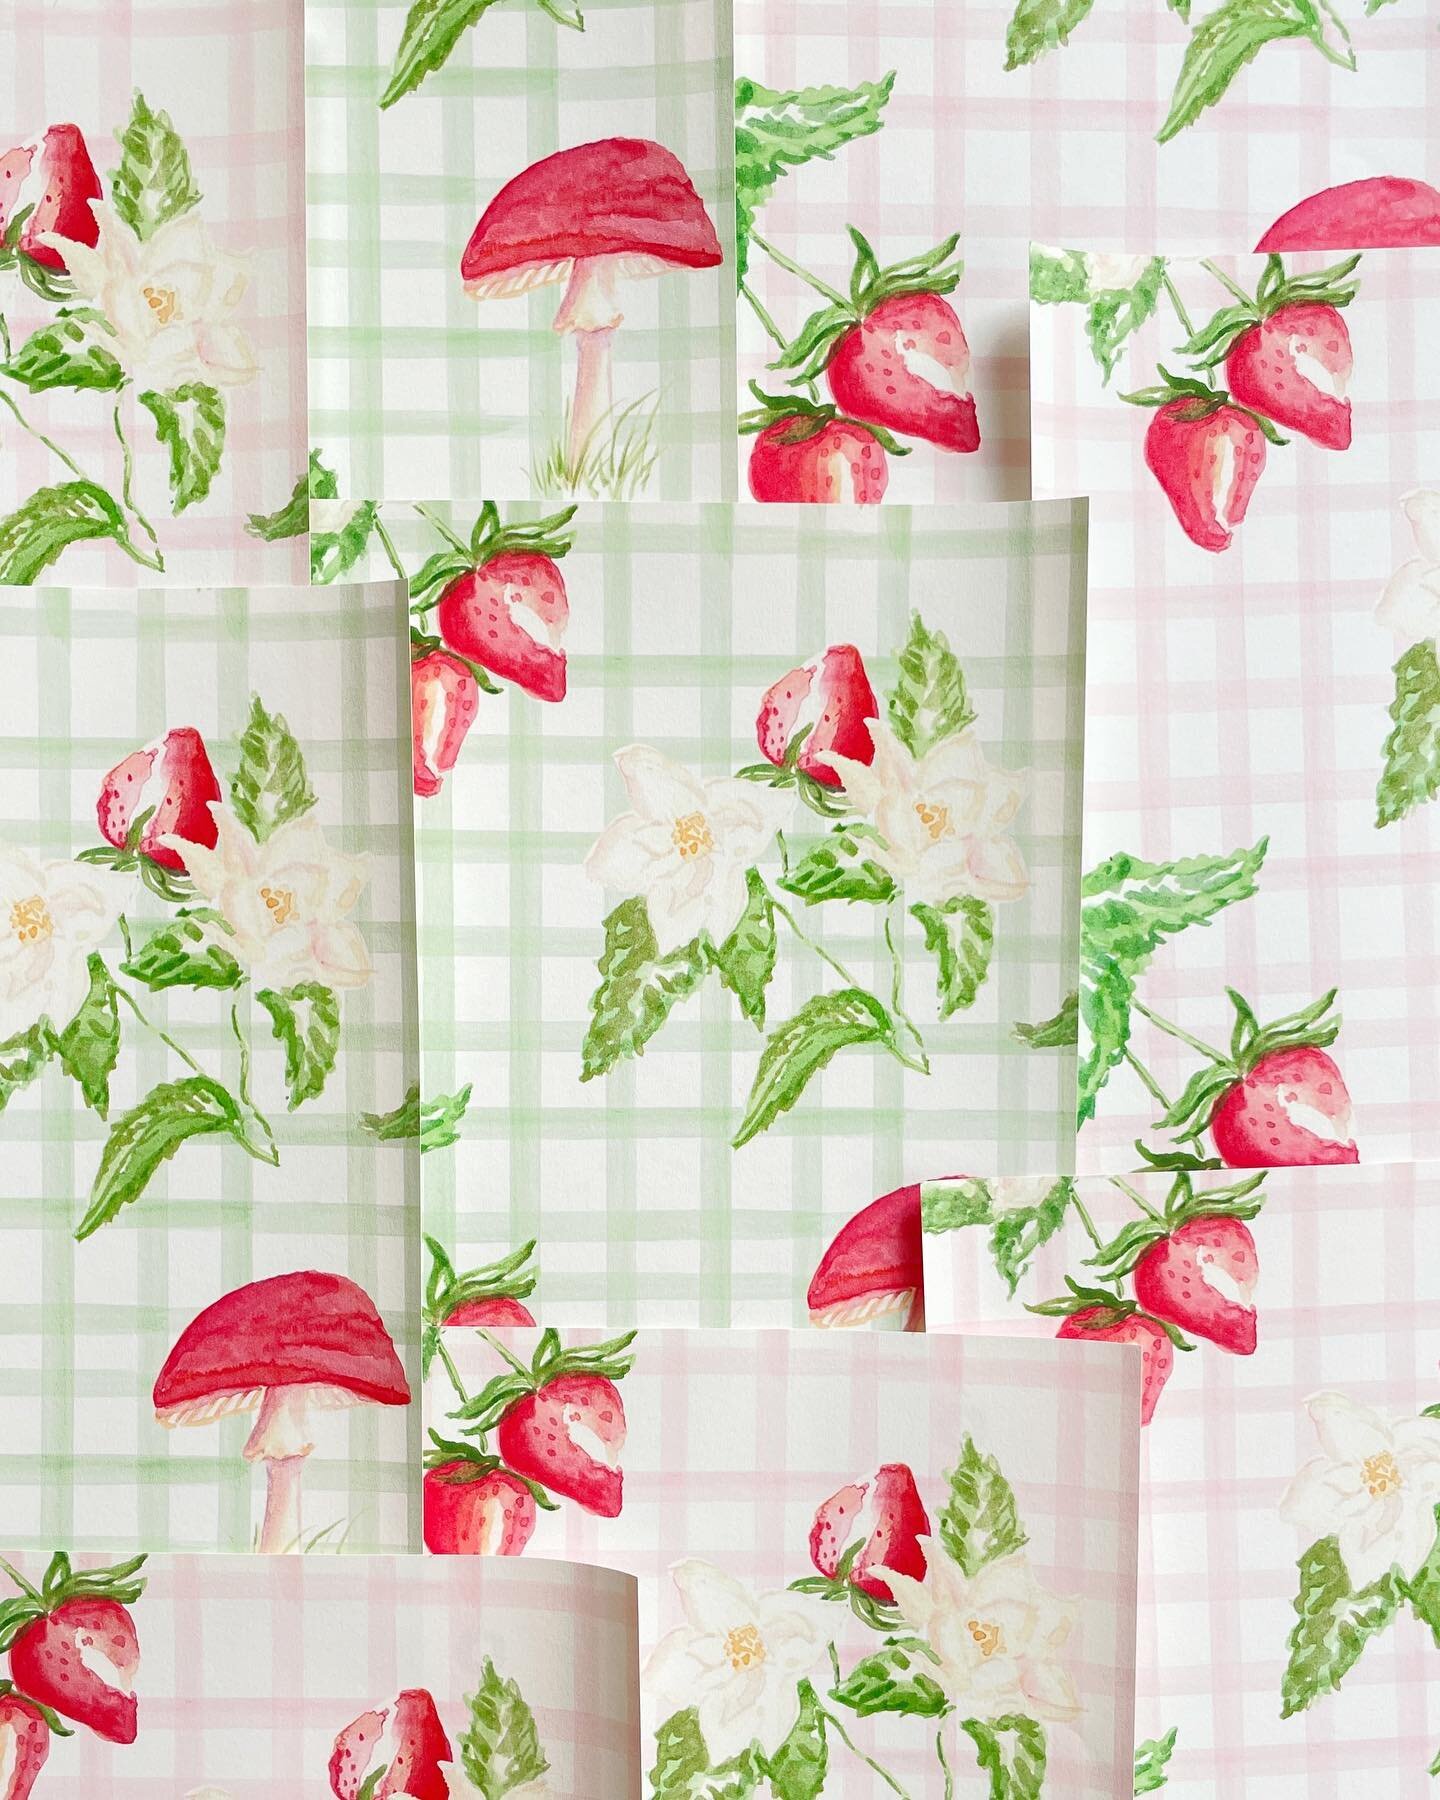 It&rsquo;s feeling like summer here! 🍓 🍄 

The &ldquo;Red Caps&rdquo; wallpaper was inspired by my grandmother&rsquo;s kitchen in the 1960s. She has a love for wallpaper and I loved dreaming up a design she would be drawn to. This design celebrates